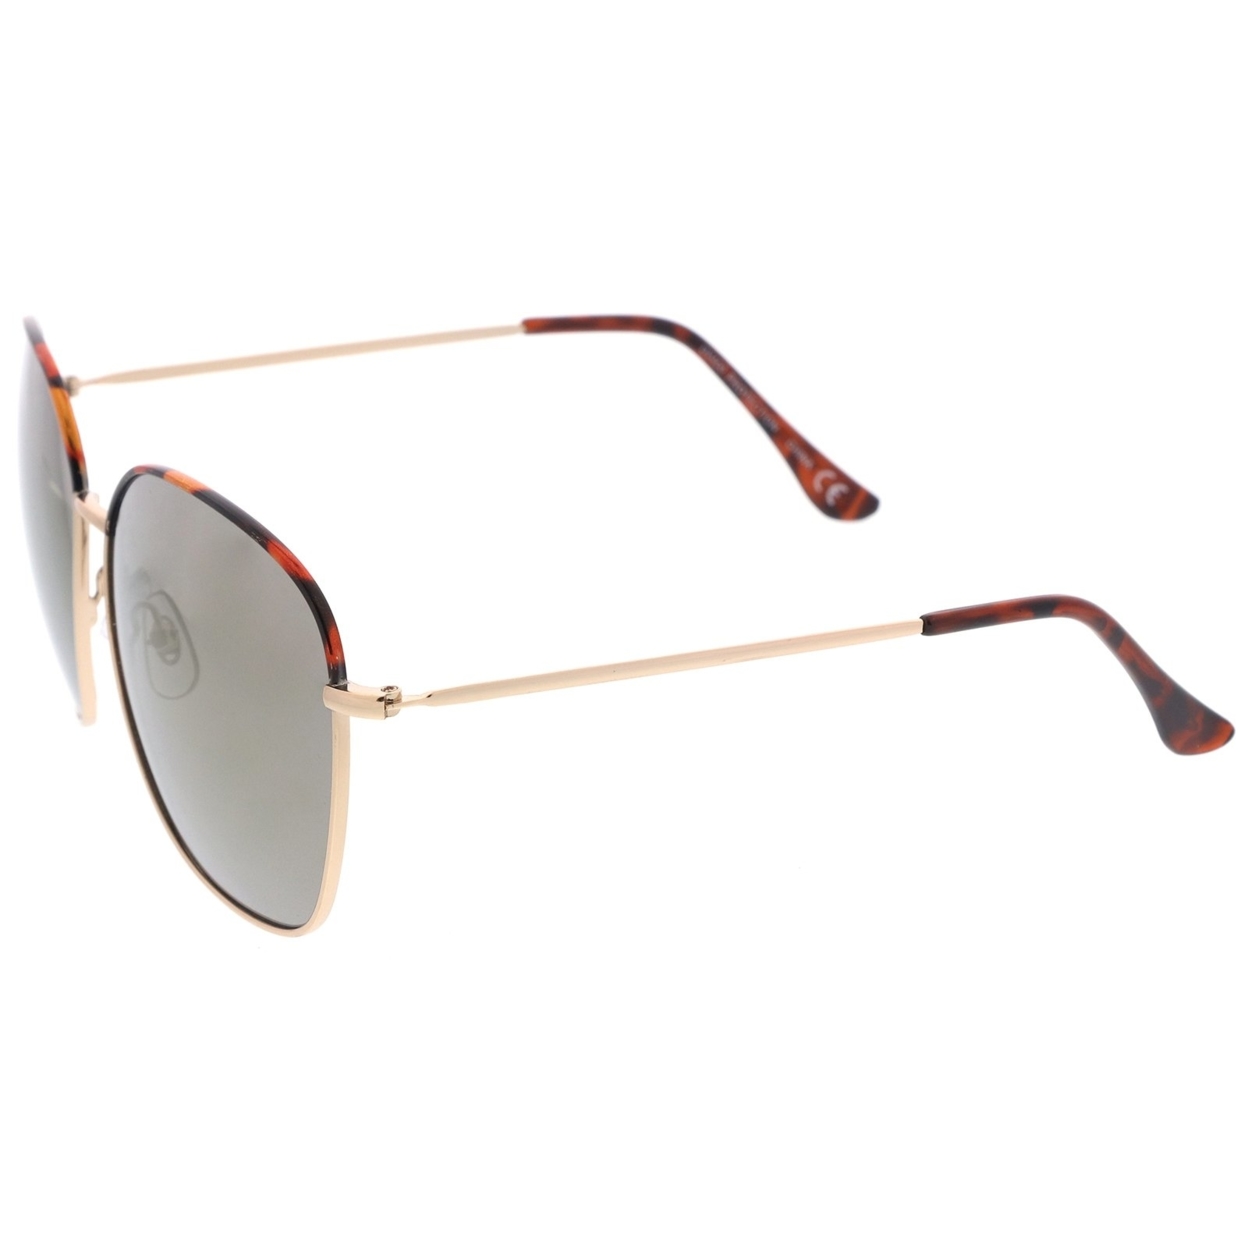 Mod Oversize Two-Toned Metal Frame Slim Temples Square Sunglasses 61mm - Tortoise-Gold / Brown